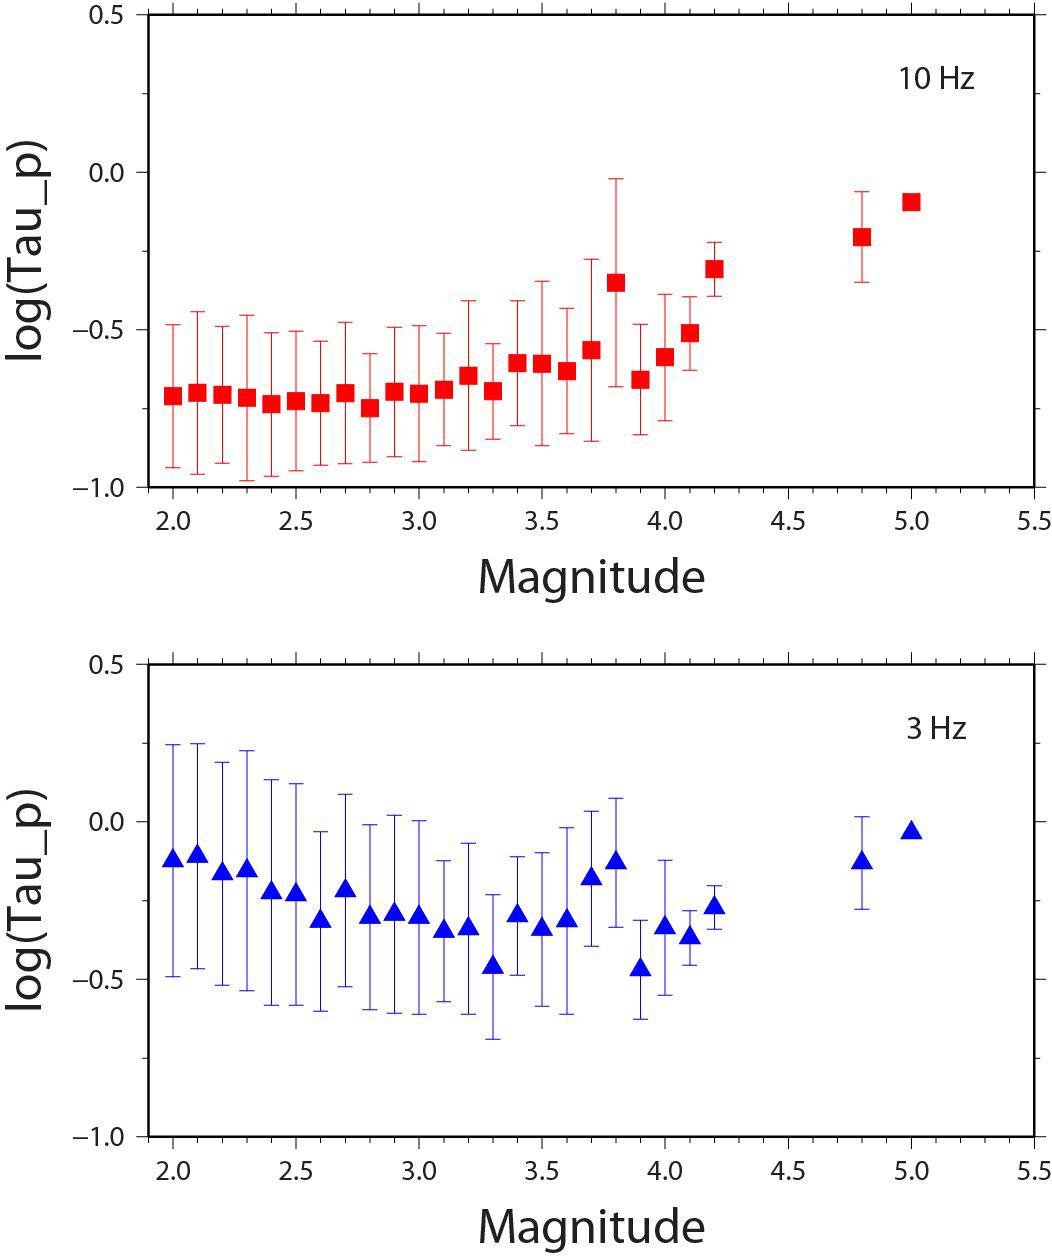 Plots showing the relationship between predominant periods and local magnitudes.